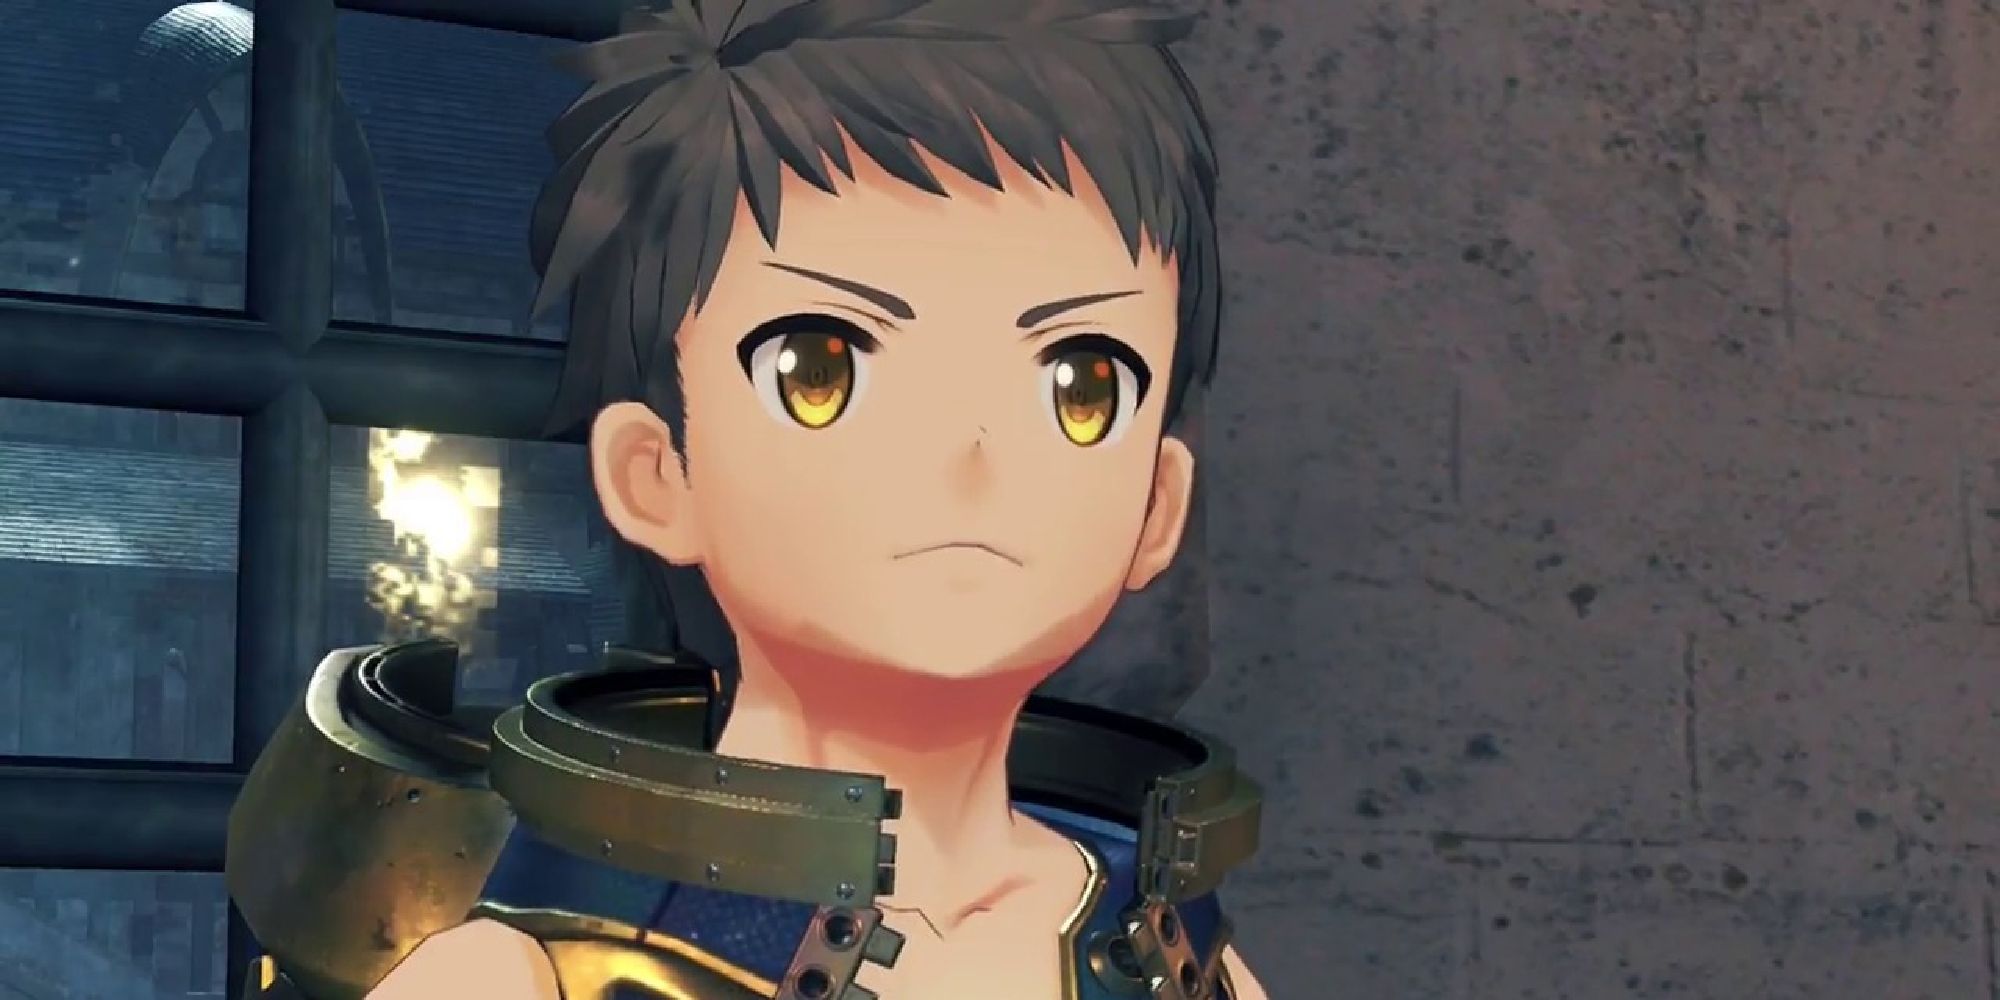 Xenoblade Chronicles 2 Characters close up of Rex looking proudly to someone off screen with a window to his left looking out onto the night's sky